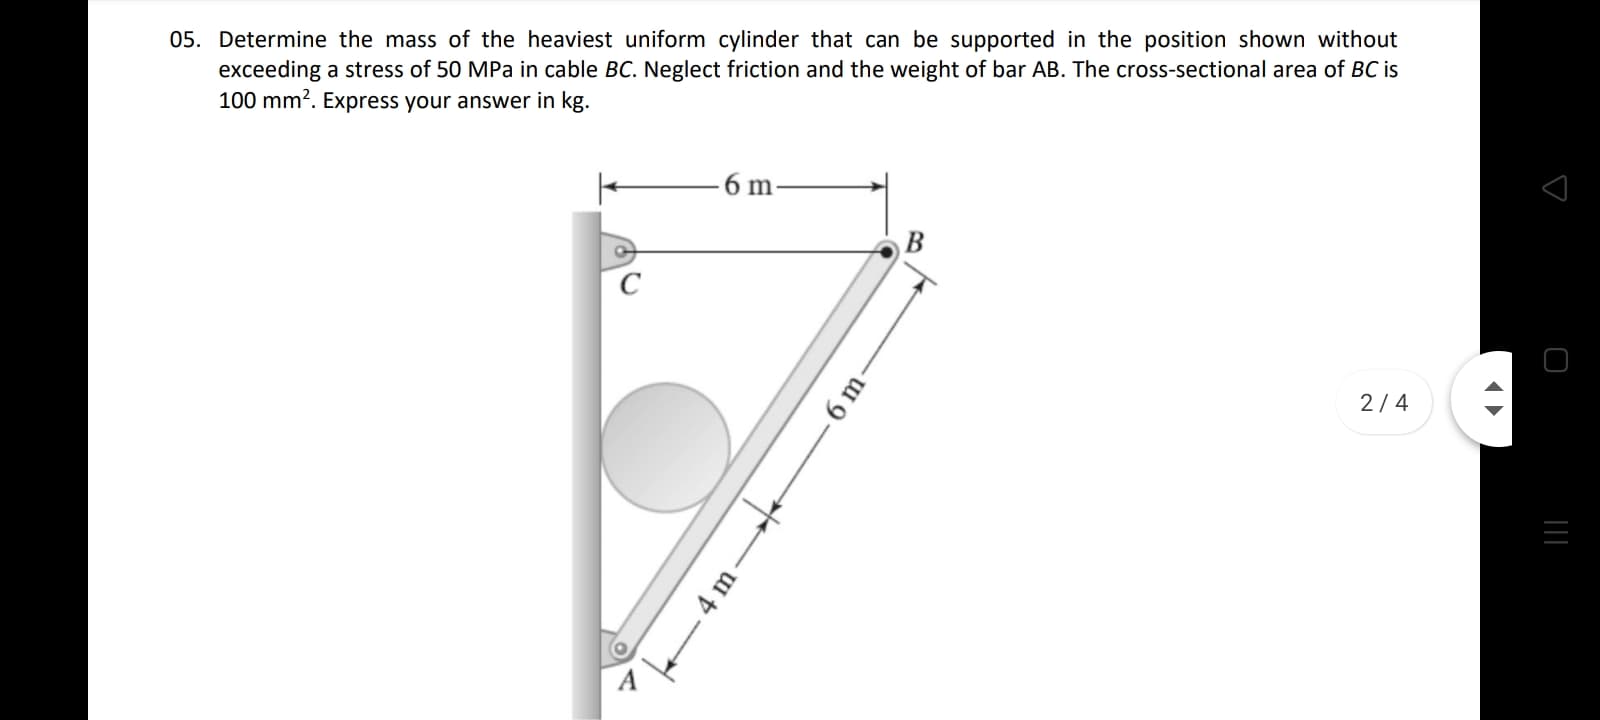 05. Determine the mass of the heaviest uniform cylinder that can be supported in the position shown without
exceeding a stress of 50 MPa in cable BC. Neglect friction and the weight of bar AB. The cross-sectional area of BC is
100 mm?. Express your answer in kg.
6 m
2/4
6 m
4 m
